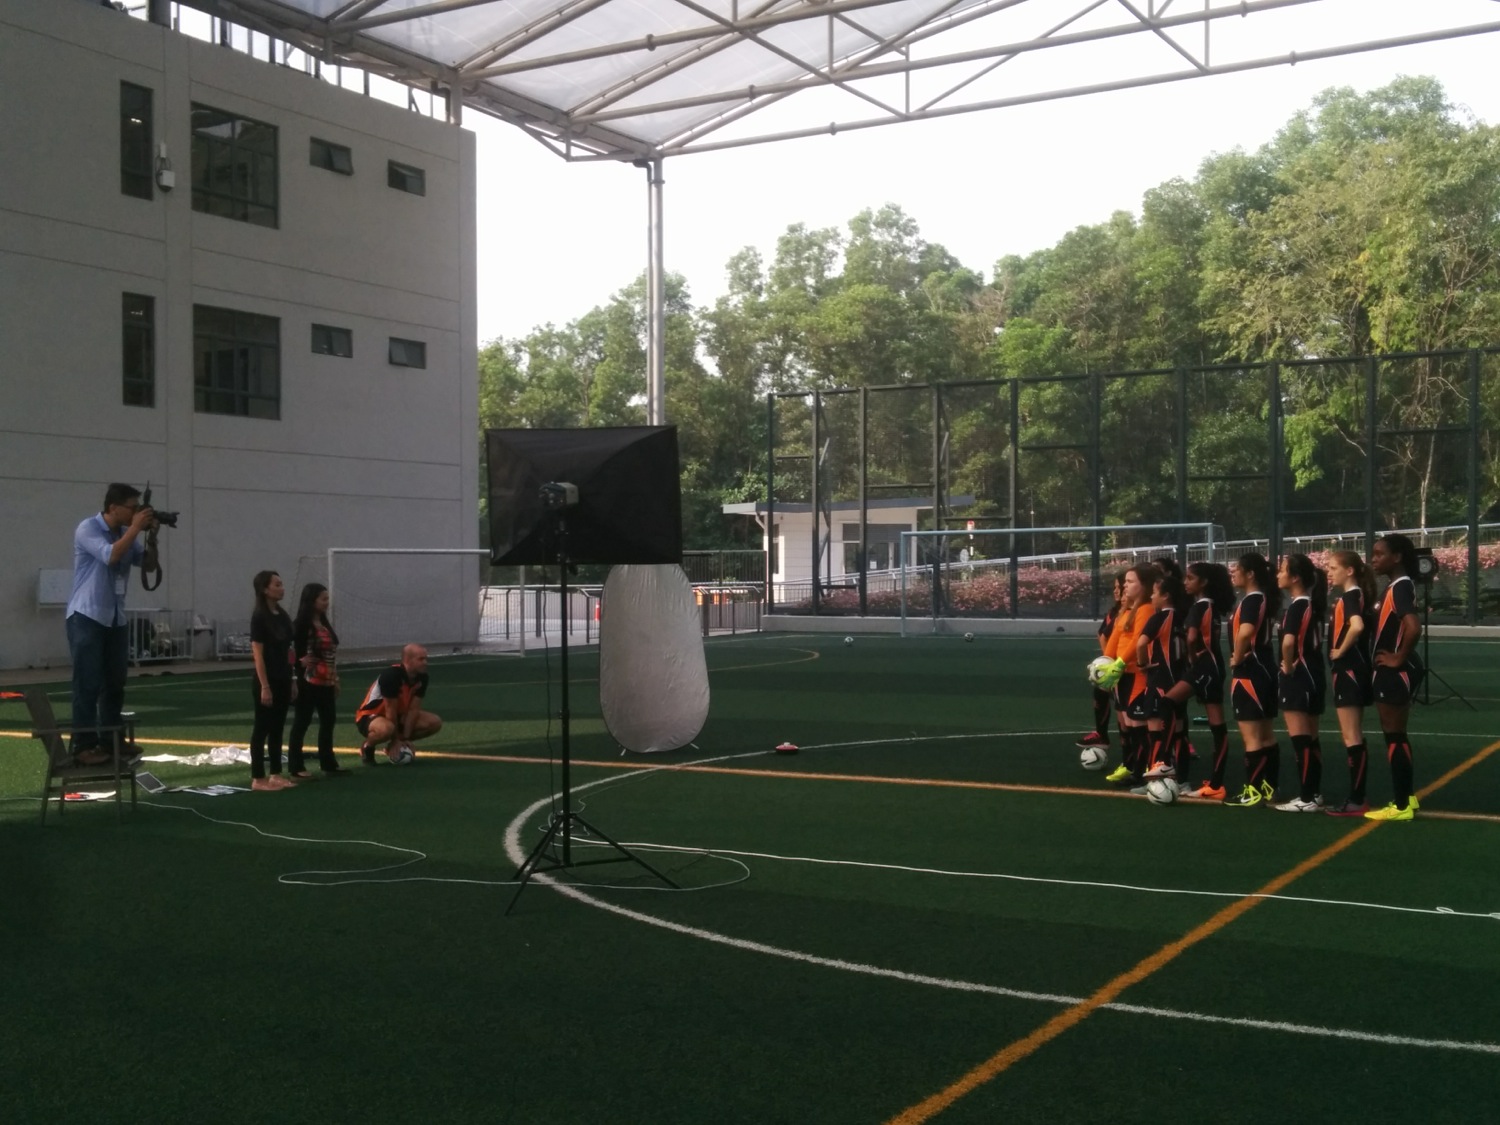 BTS: Special group pictures and lighting setup at The British School of Kuala Lumpur